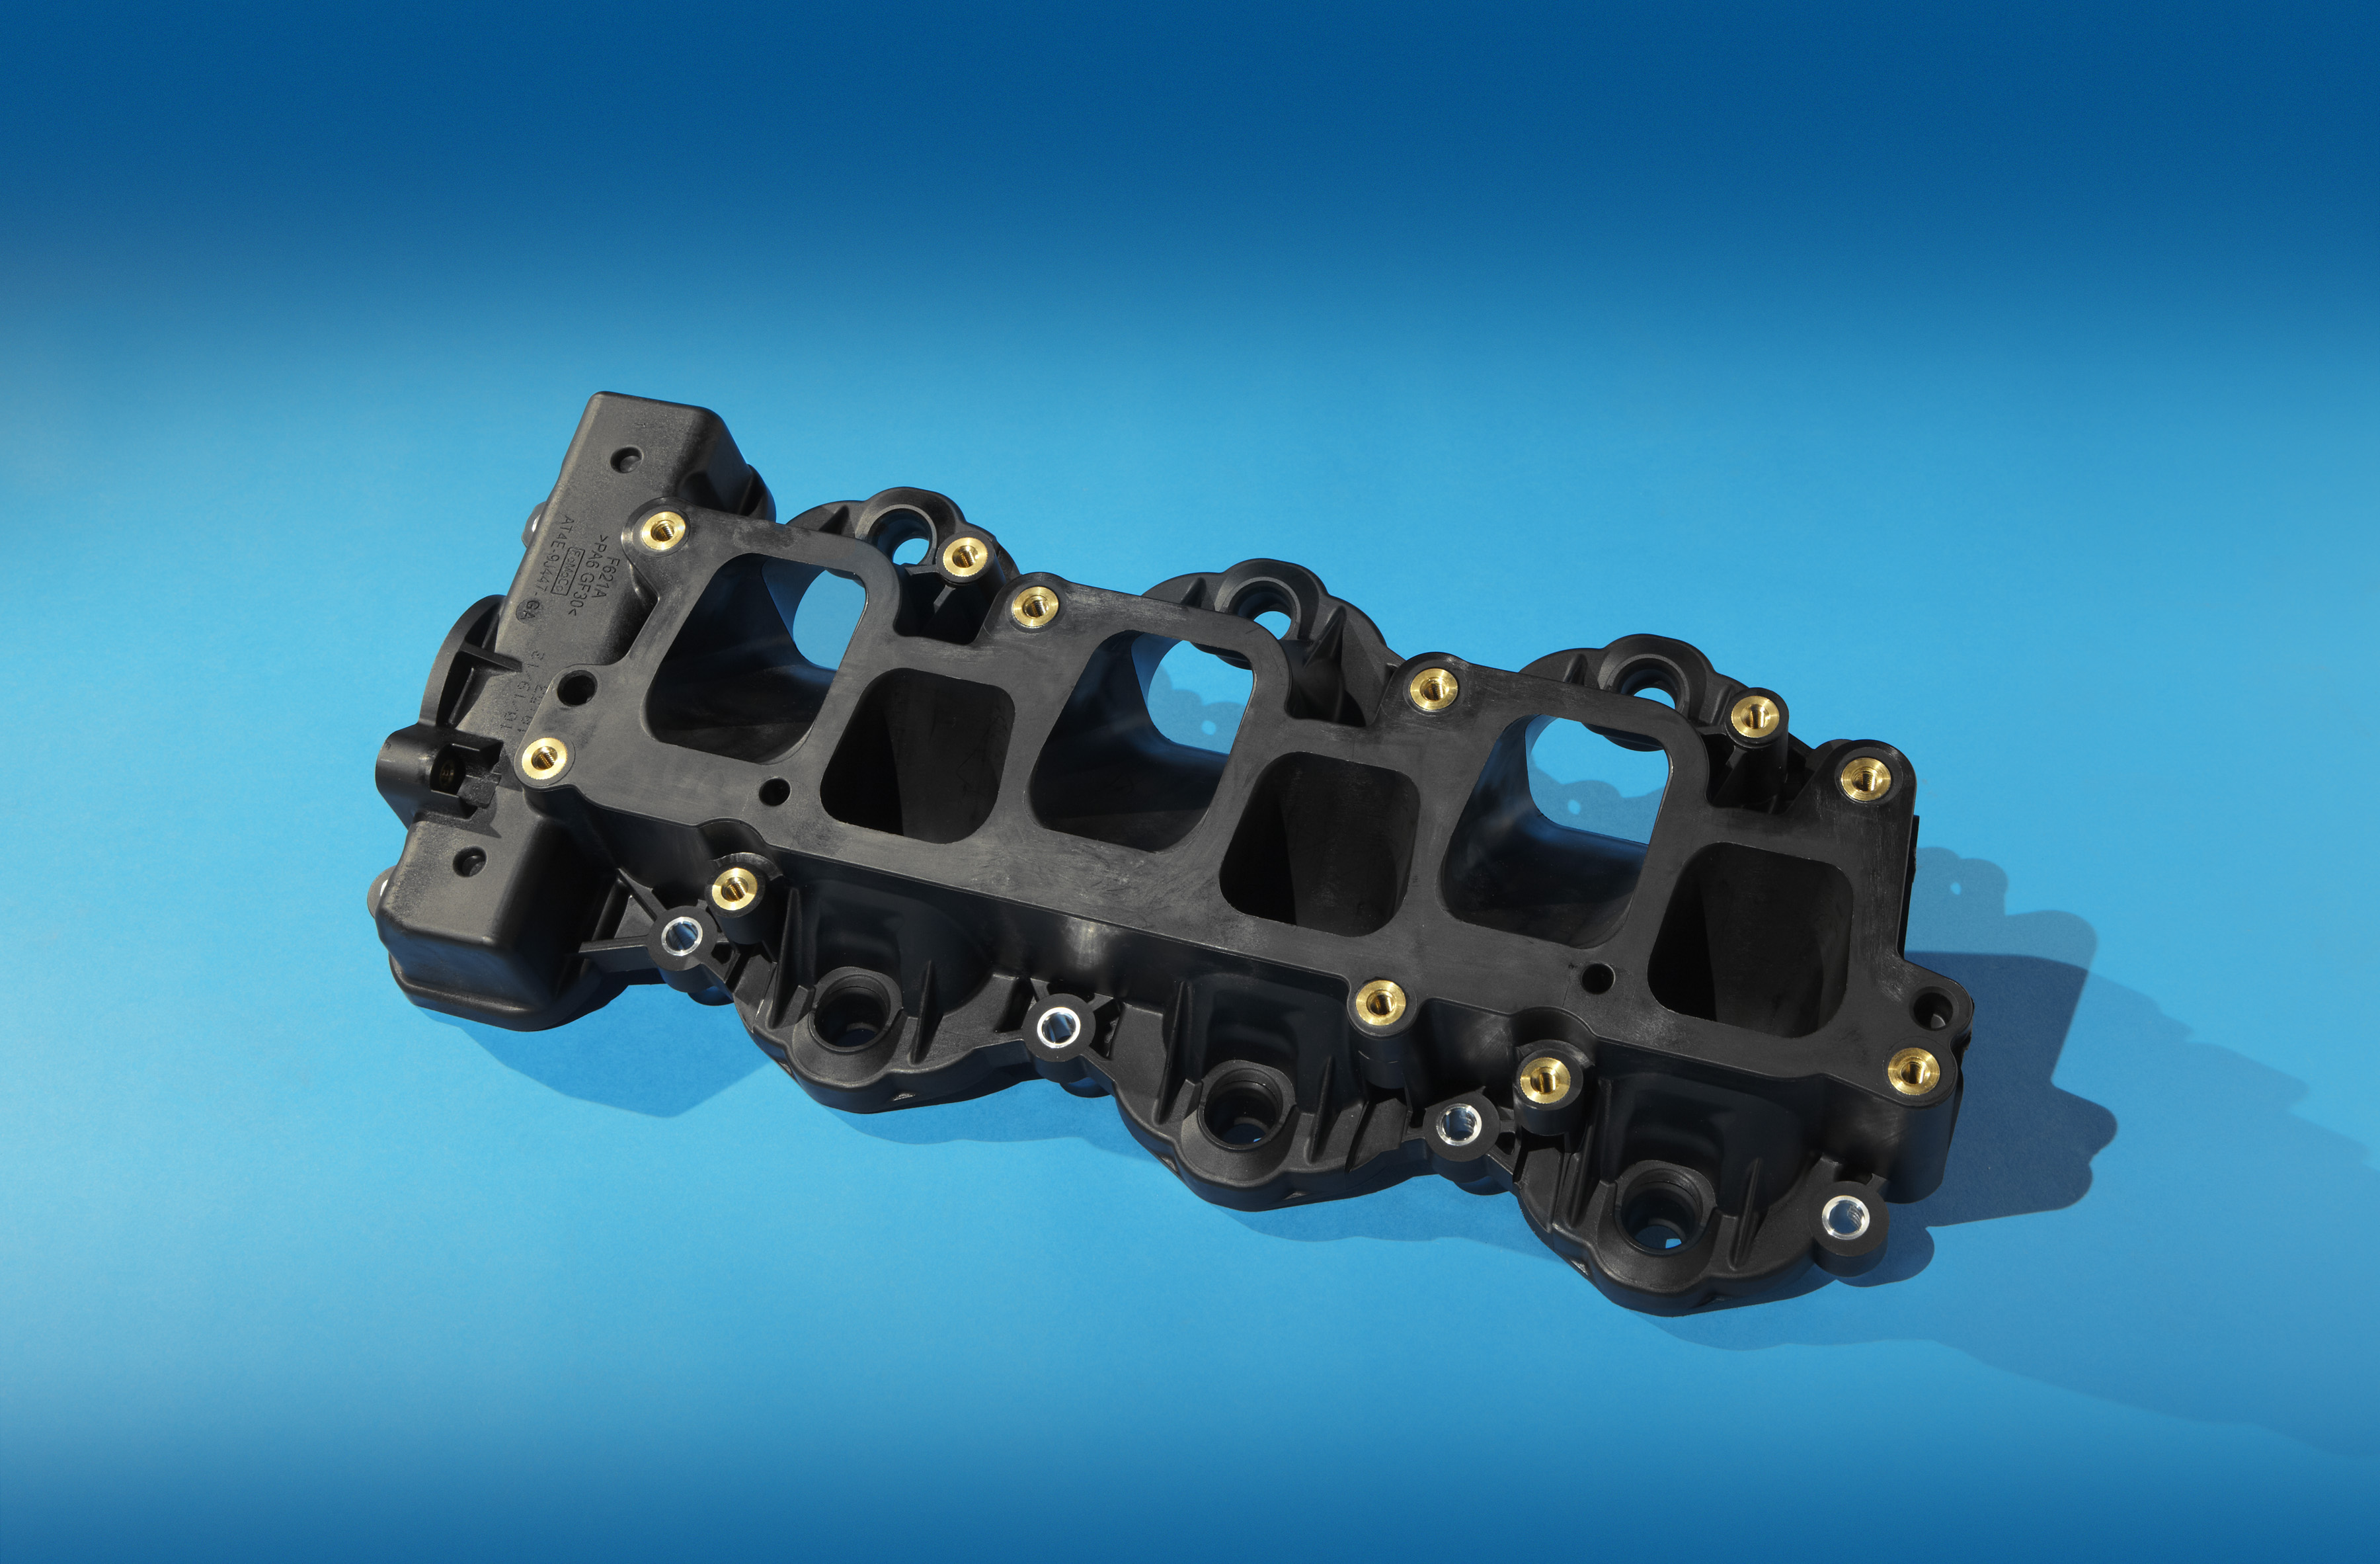 Overmolded Coolant Crossover Made with DuPont™ Zytel® HTN PPA